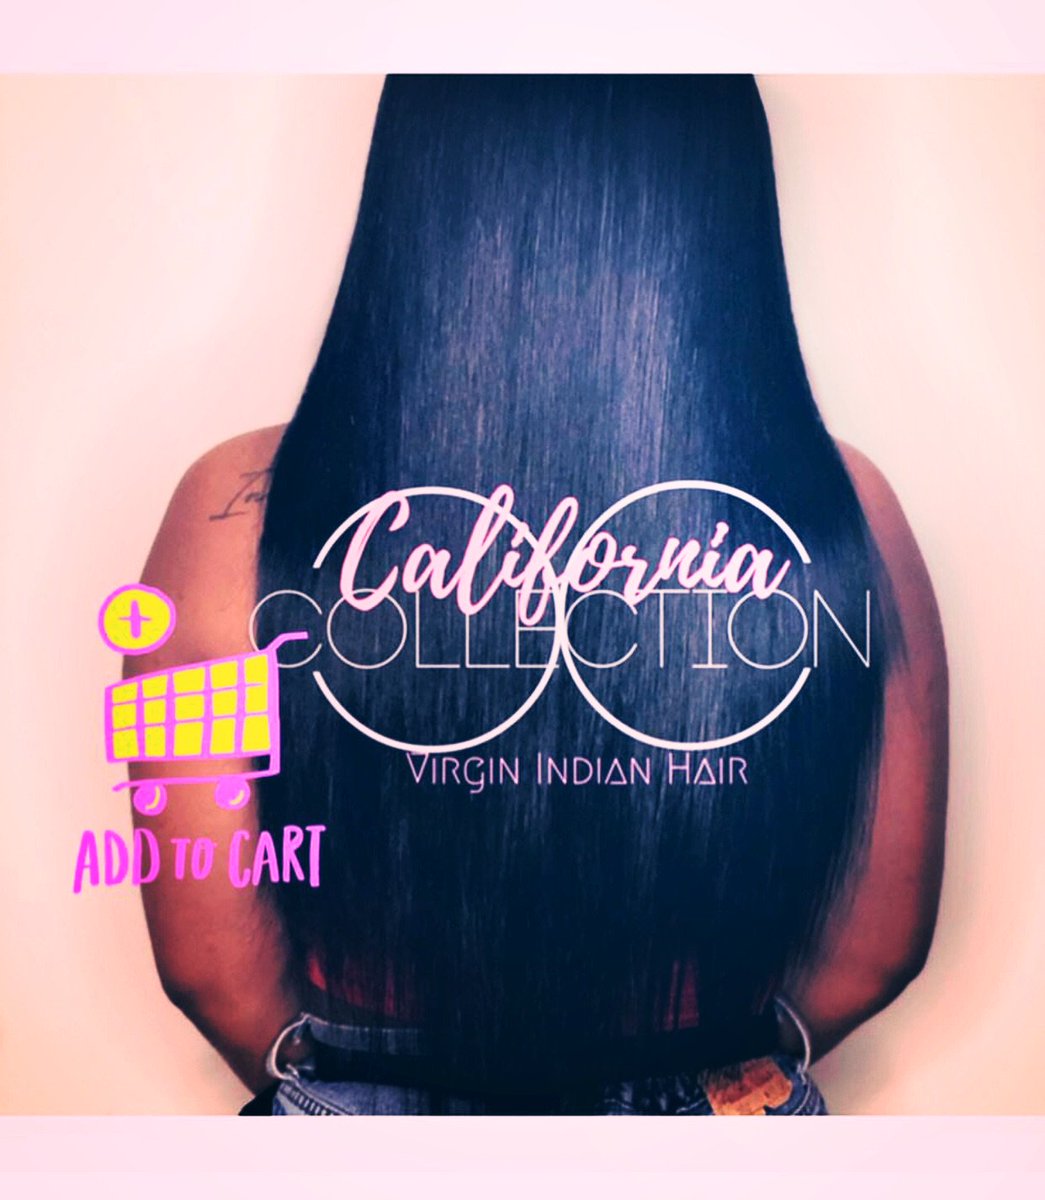 Instagram.com/cacollectionco 

Facebook.com/thecaliforniac…
CaCollectionsCo.com 

#indianhair #frontal #laceclosure #sewingmachinewigs #bundles #hamptonhairstylist #thecaliforniacollection #virginiastylist #newportnewsstylist #norfolkstylist #hamptoninstall #installs #calidoesmyhair